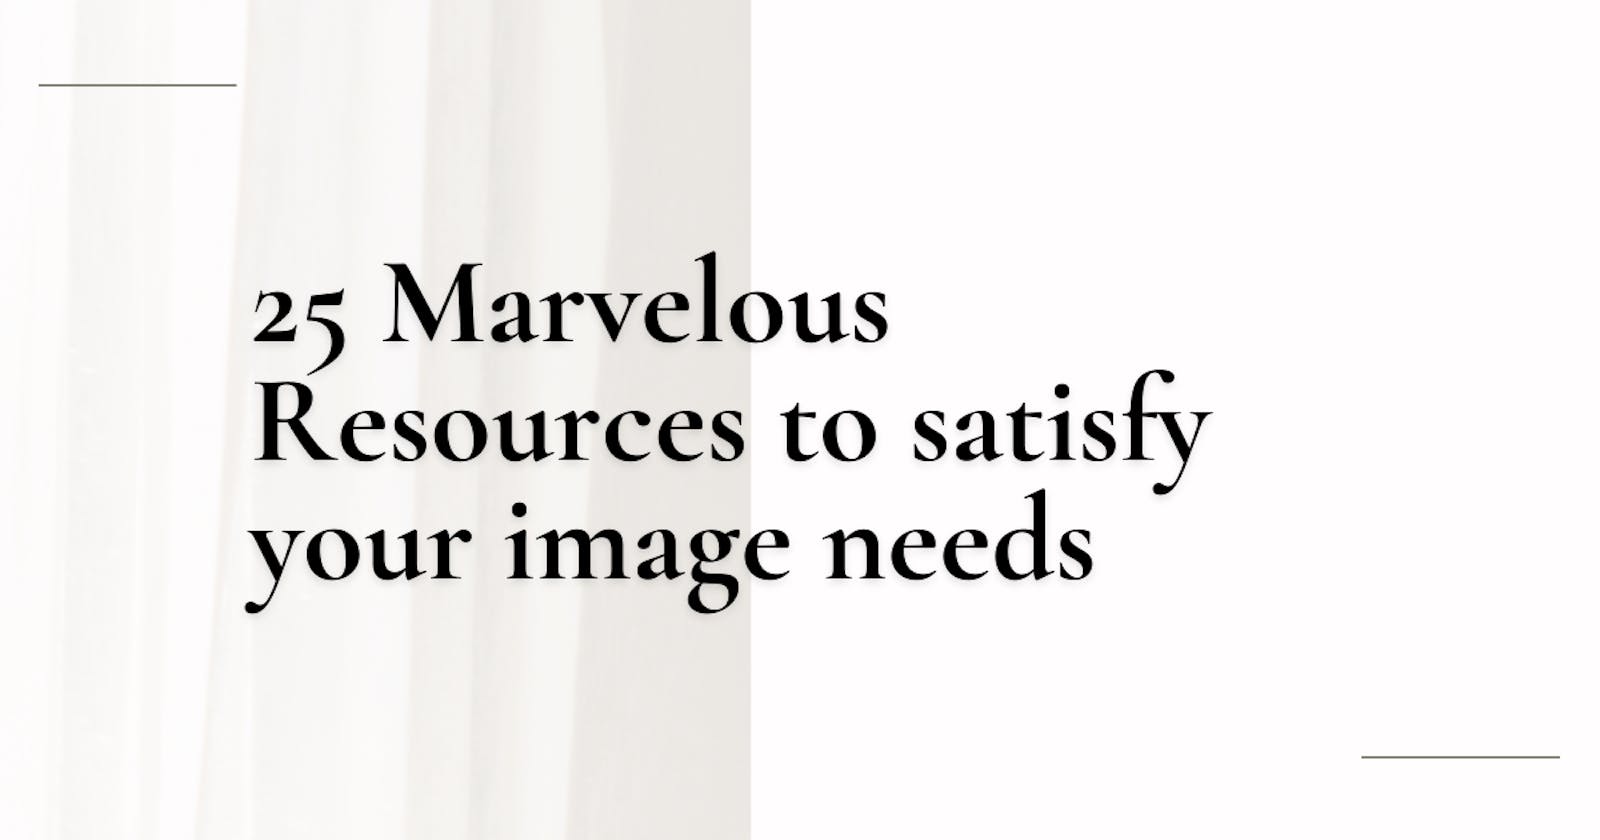 25 Marvelous Resources to satisfy your image needs 🙌